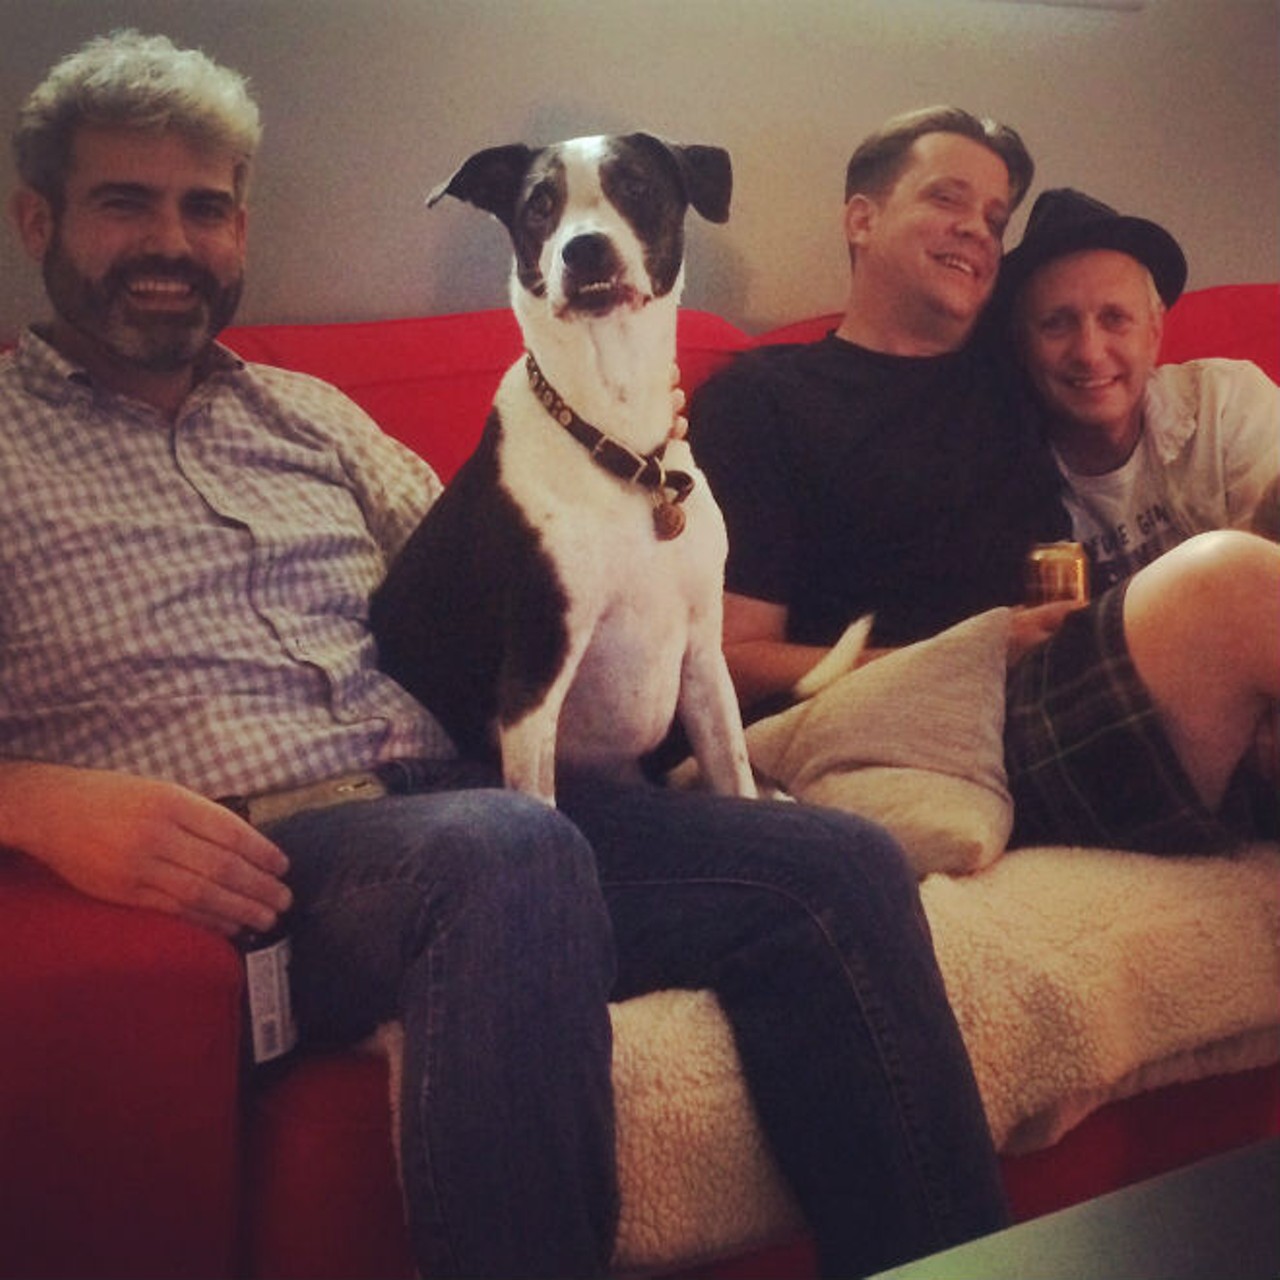 Hanging out with Weekly alum Dave Plotkin Billy Manes and assistant editor dog Tucker.